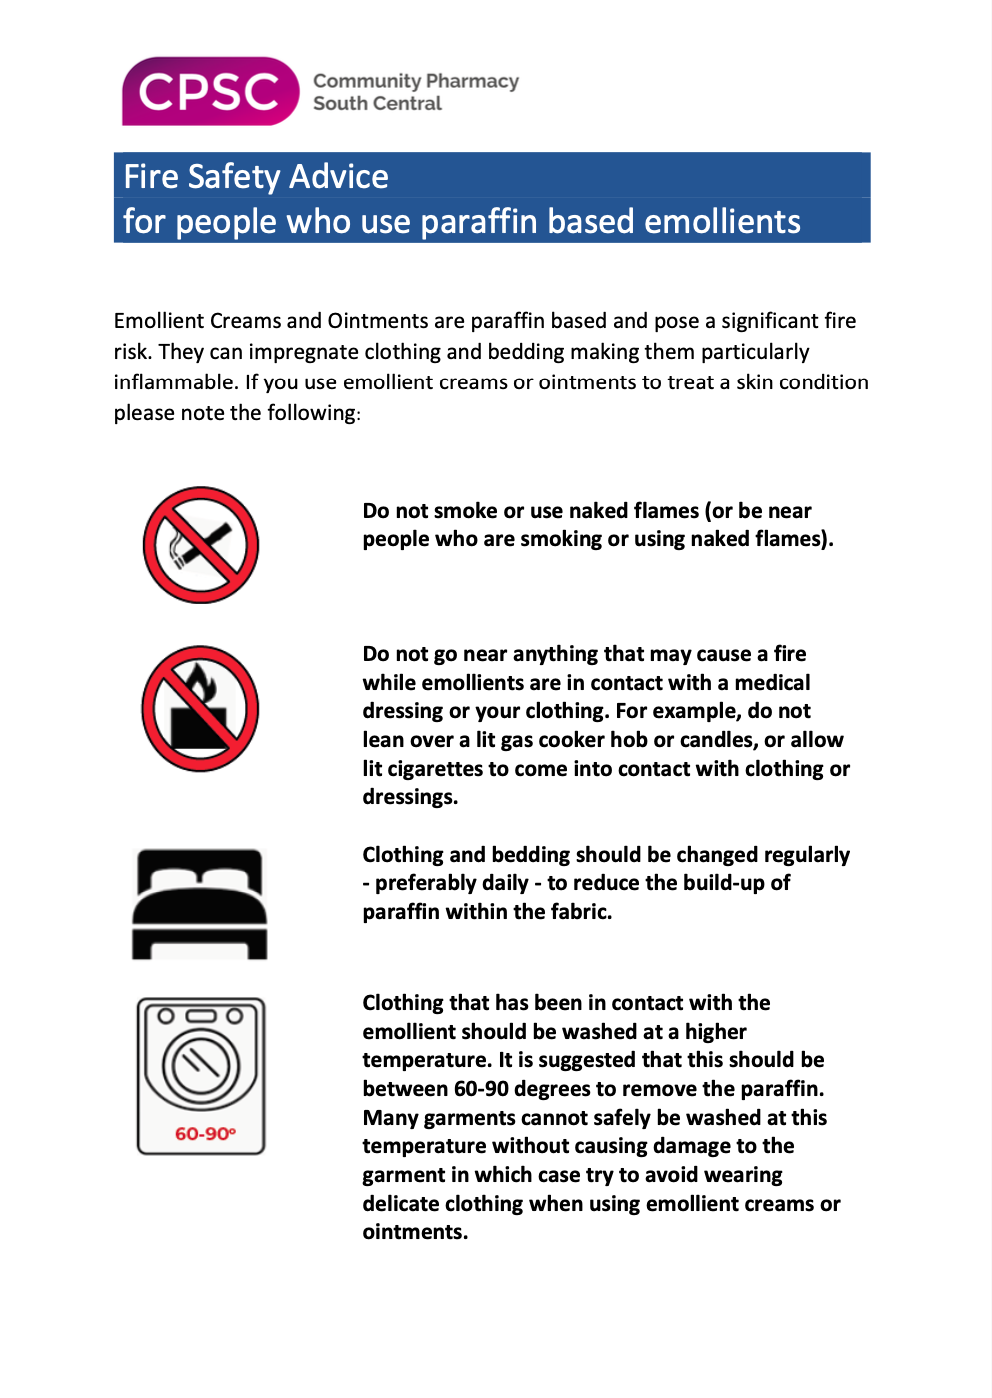 Fire Safety Advice leaflet for emollients p1.png